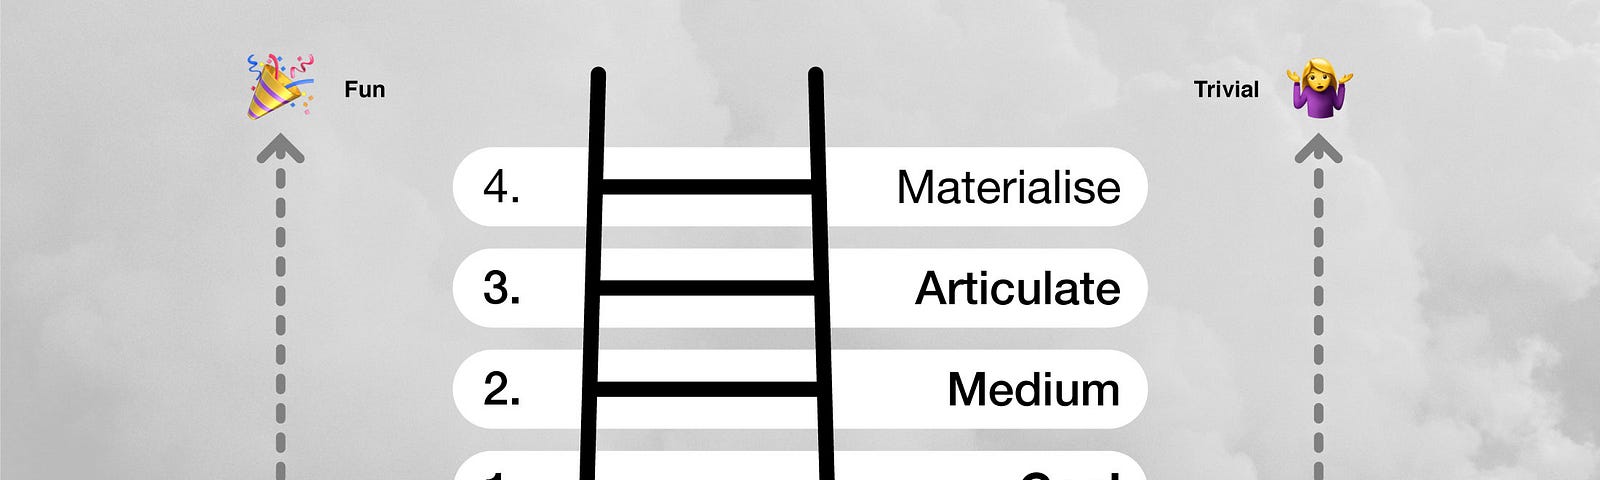 A ladder with the steps, bottom to top: 1. Goal, 2. Medium, 3. Articulate, 4. Materialise.